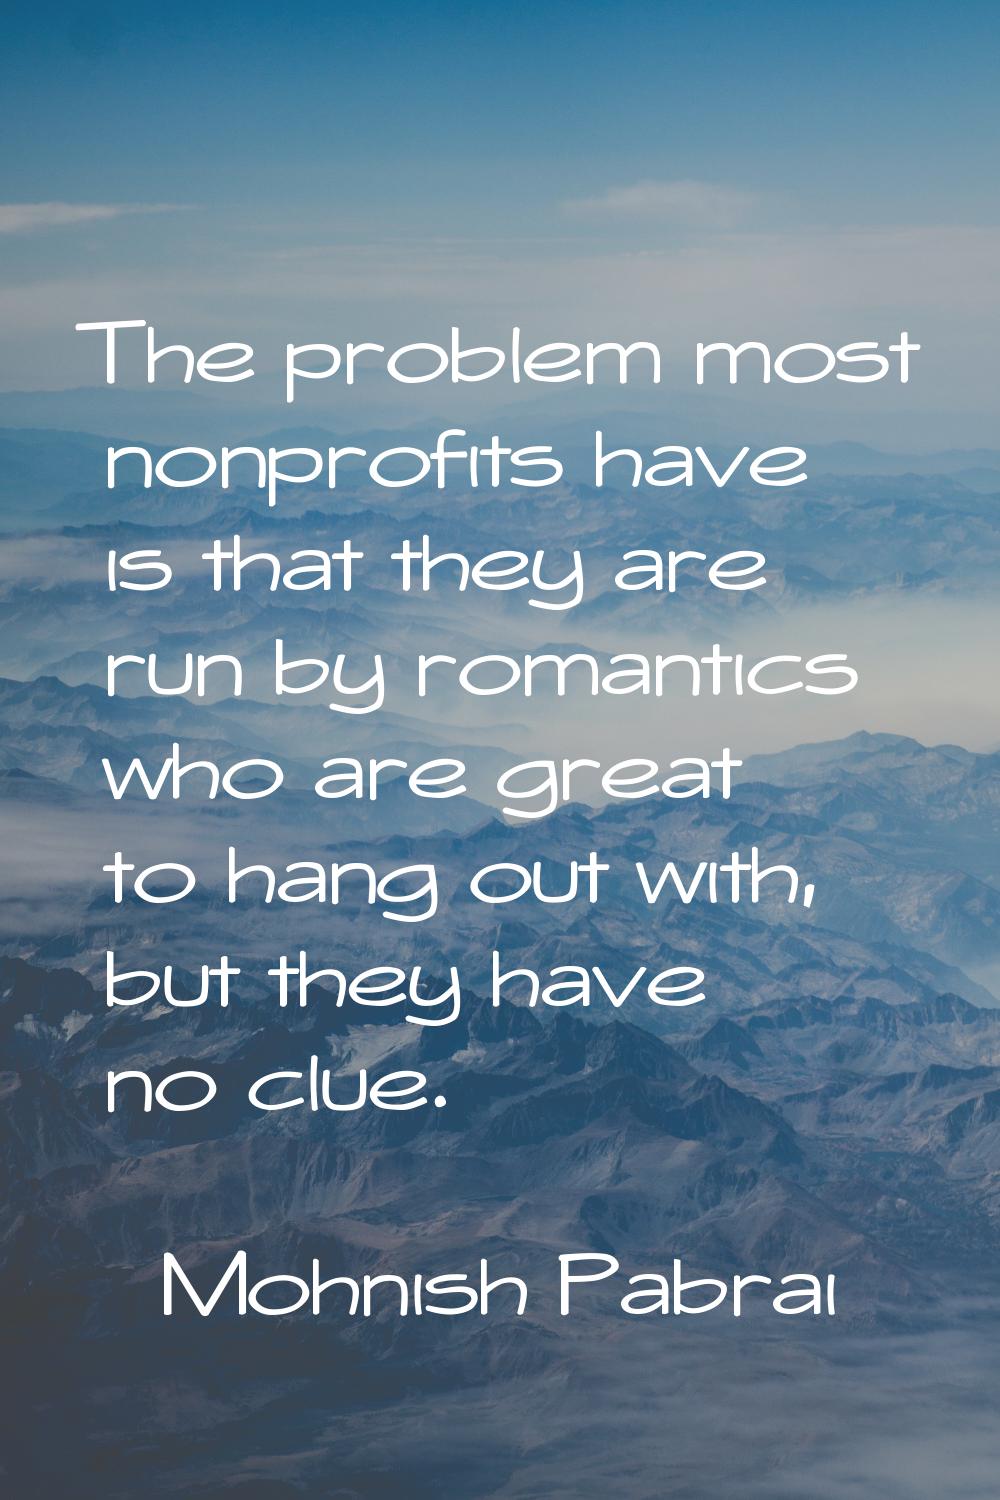 The problem most nonprofits have is that they are run by romantics who are great to hang out with, 